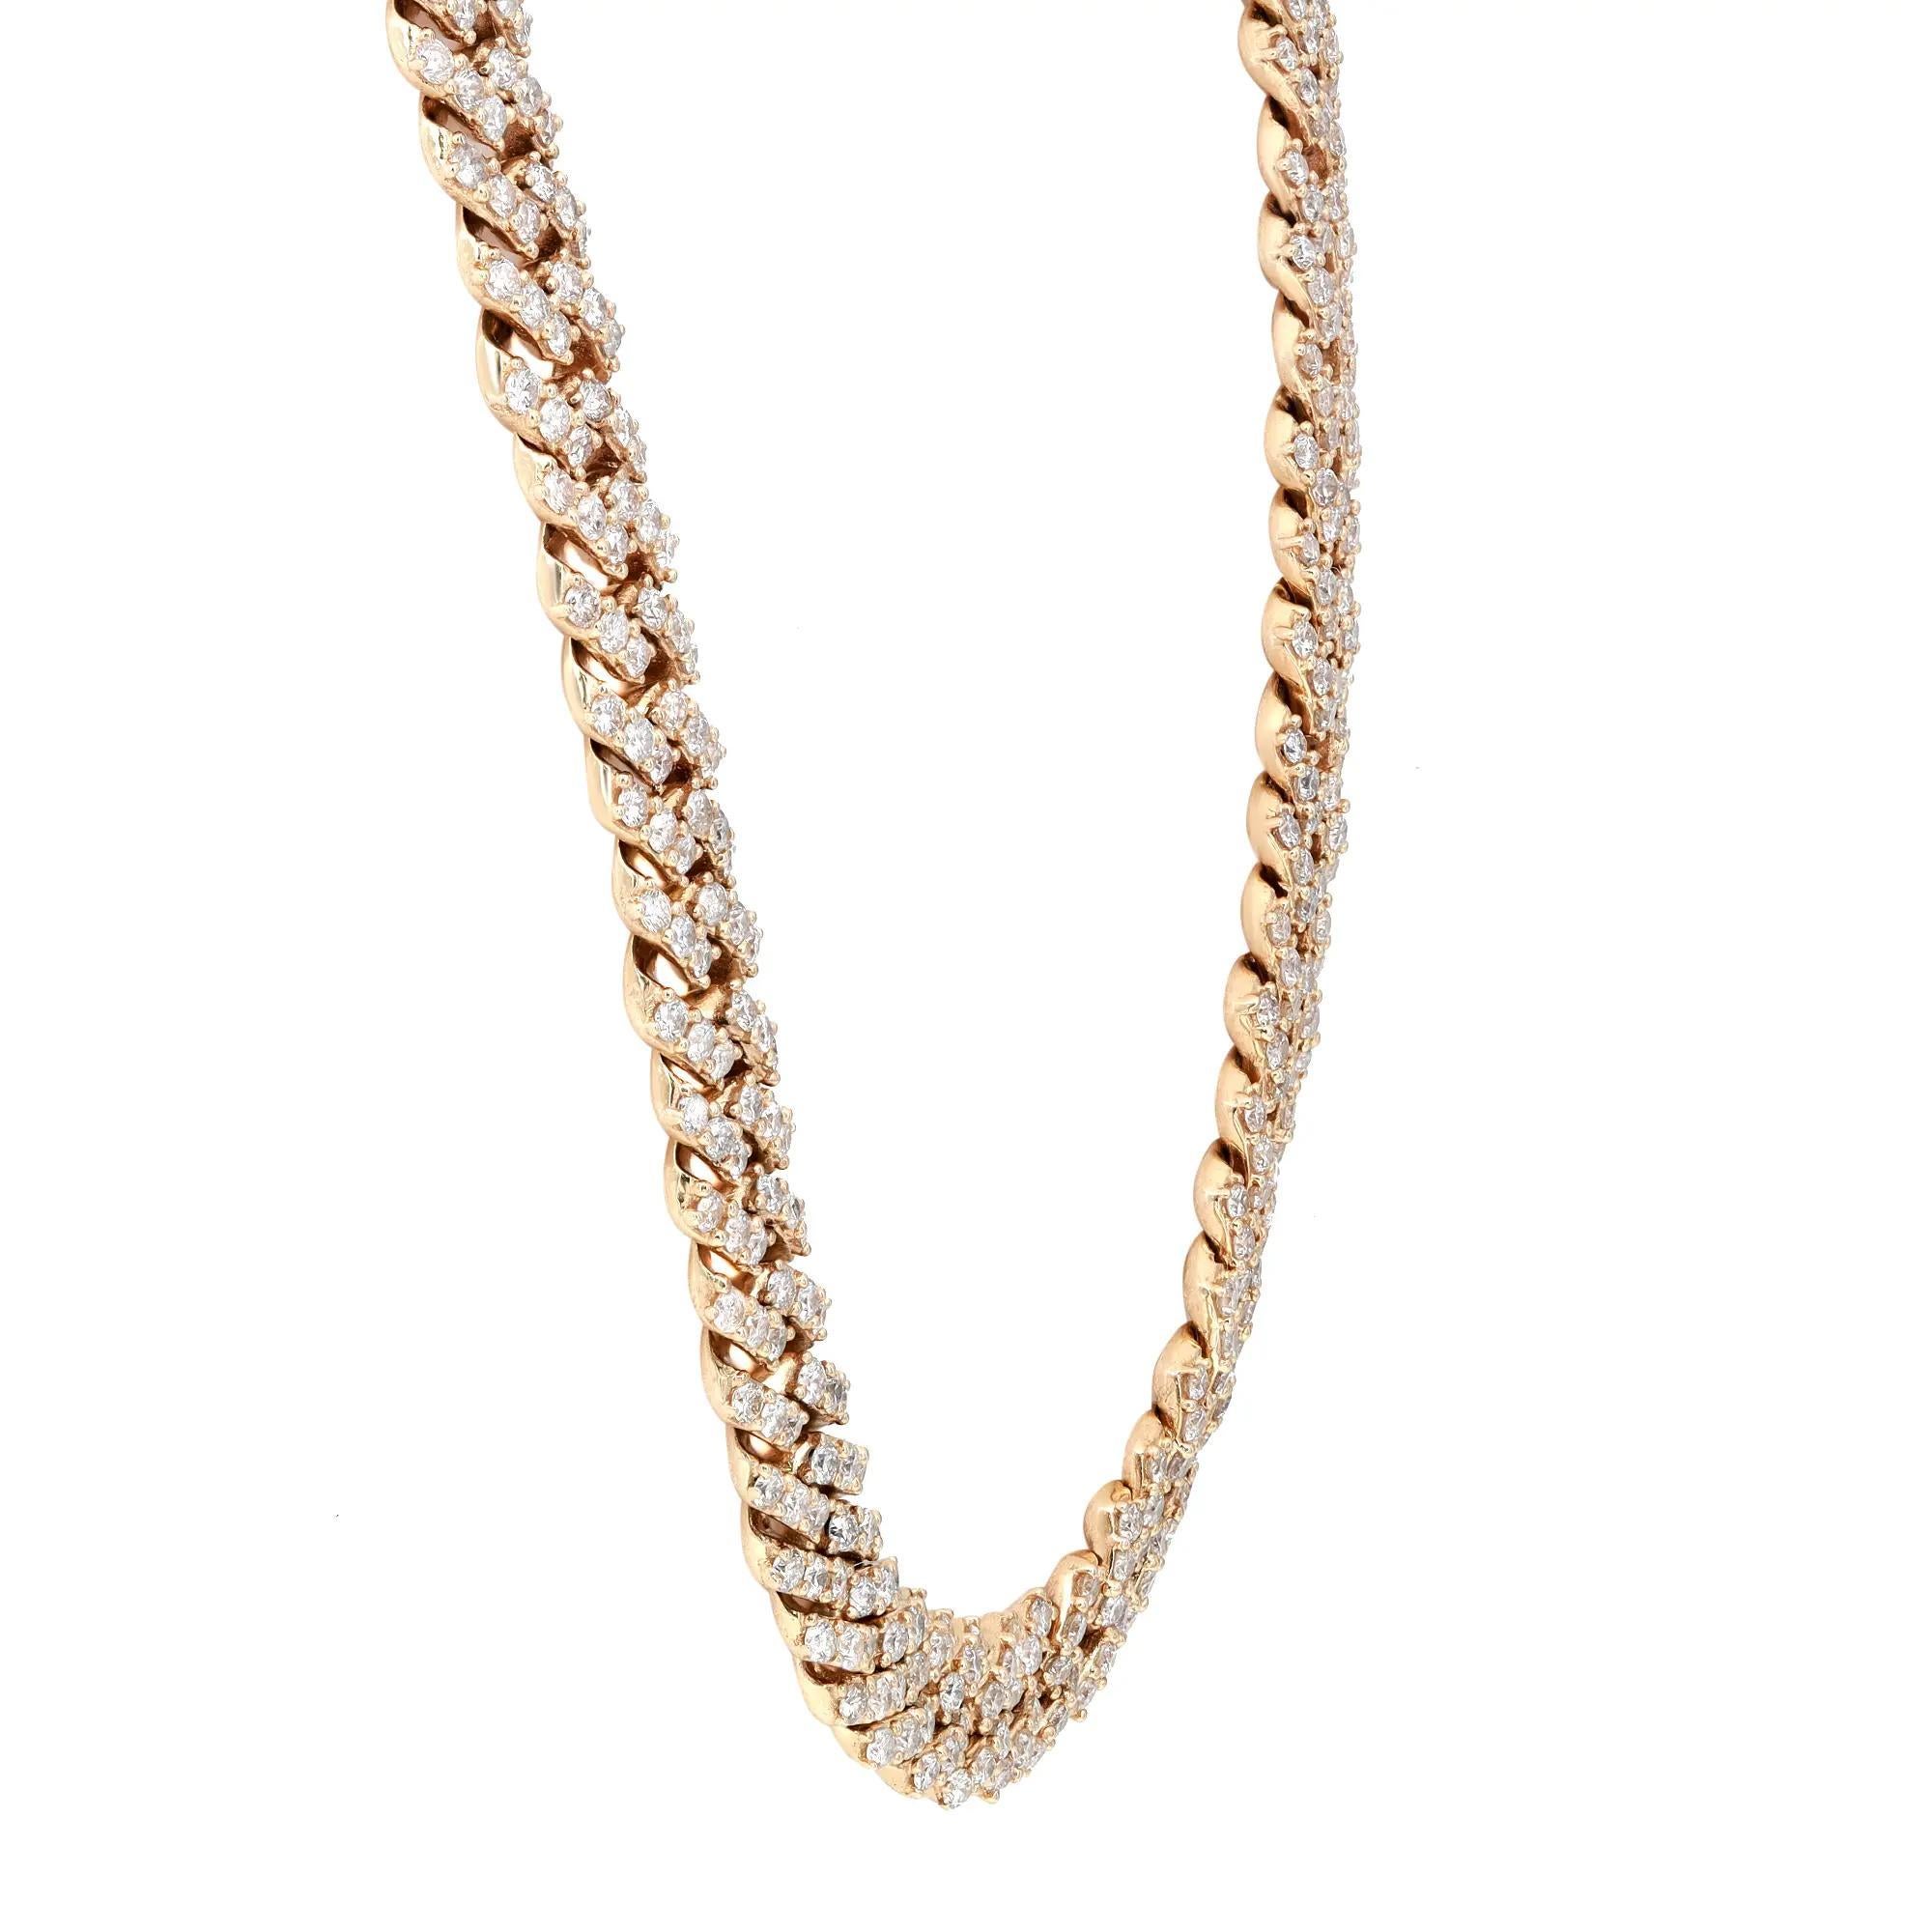 8.43cttw Round Cut Diamond Cuban Link Statement Necklace 14k Yellow Gold In New Condition For Sale In New York, NY